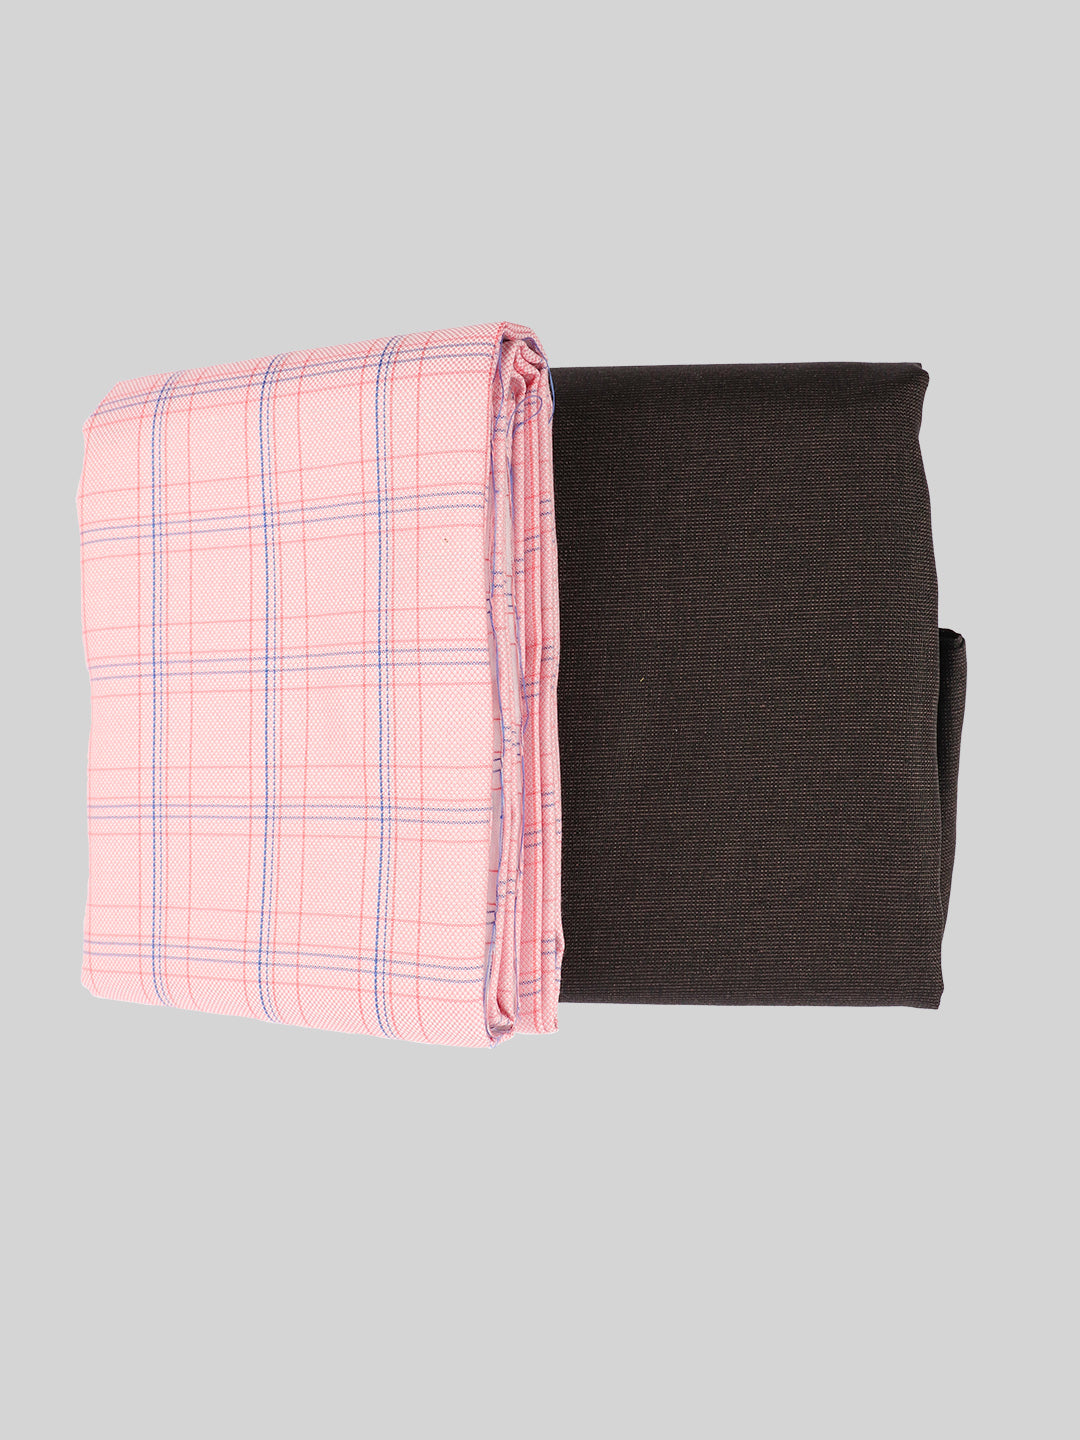 Rich Cotton Checked Light Pink With Brown Colour Shirting & Suiting  Gift Box Combo ME141